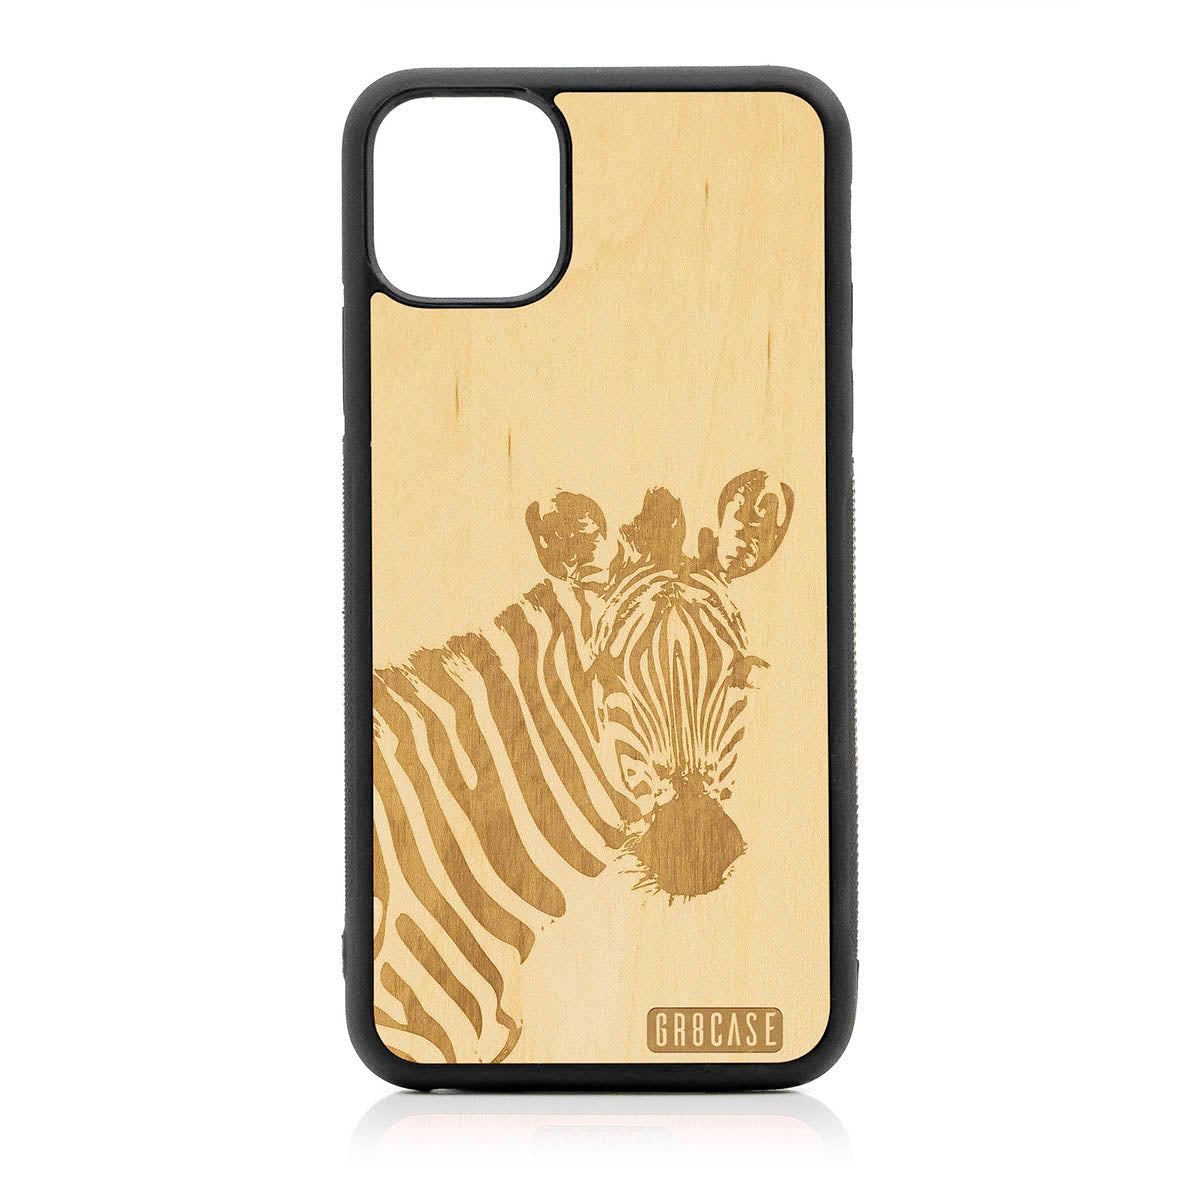 Lookout Zebra Design Wood Case For iPhone 11 Pro Max